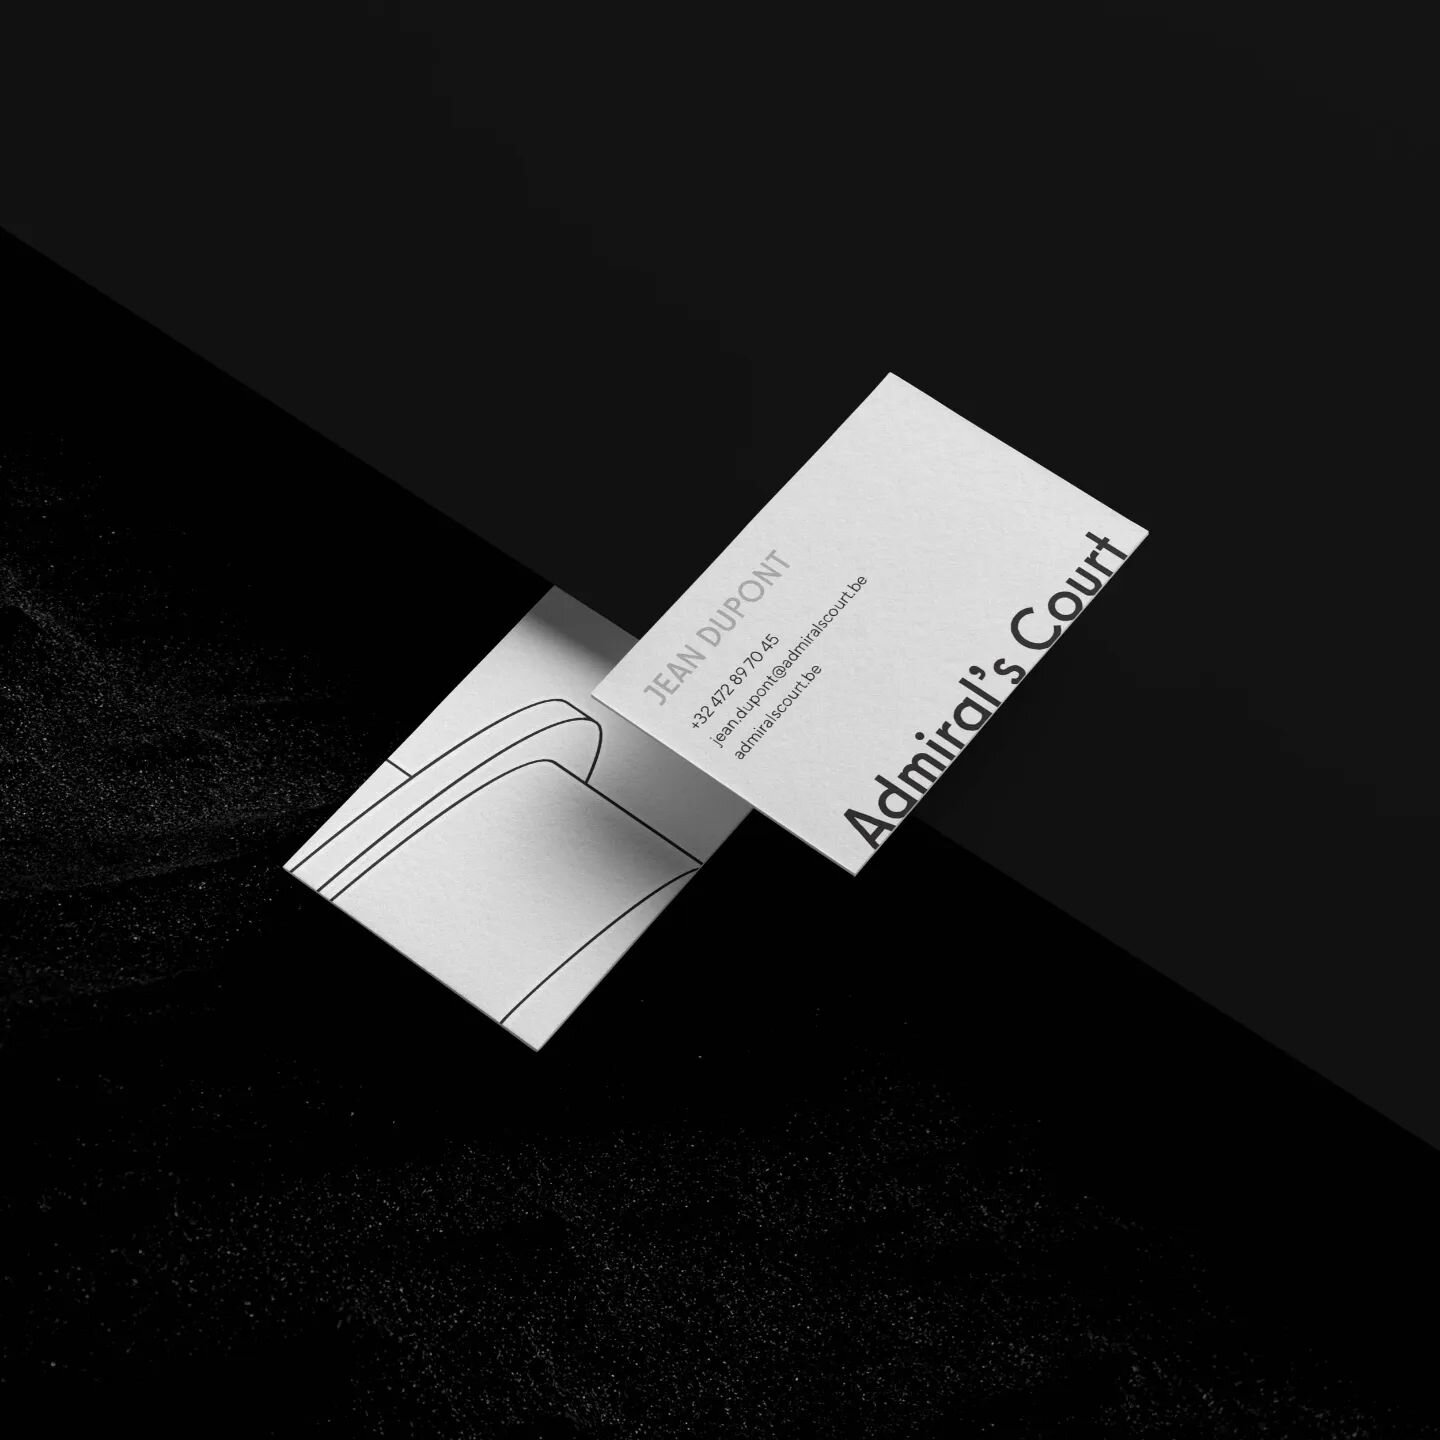 Create an identity &amp; a brochure concerning the new real estate project Admiral's Court. The architecture is inspired by Bauhaus style and black &amp; white materials.

#identity #graphicdesign #print #stationery #blackandwhite #bauhaus #font #log